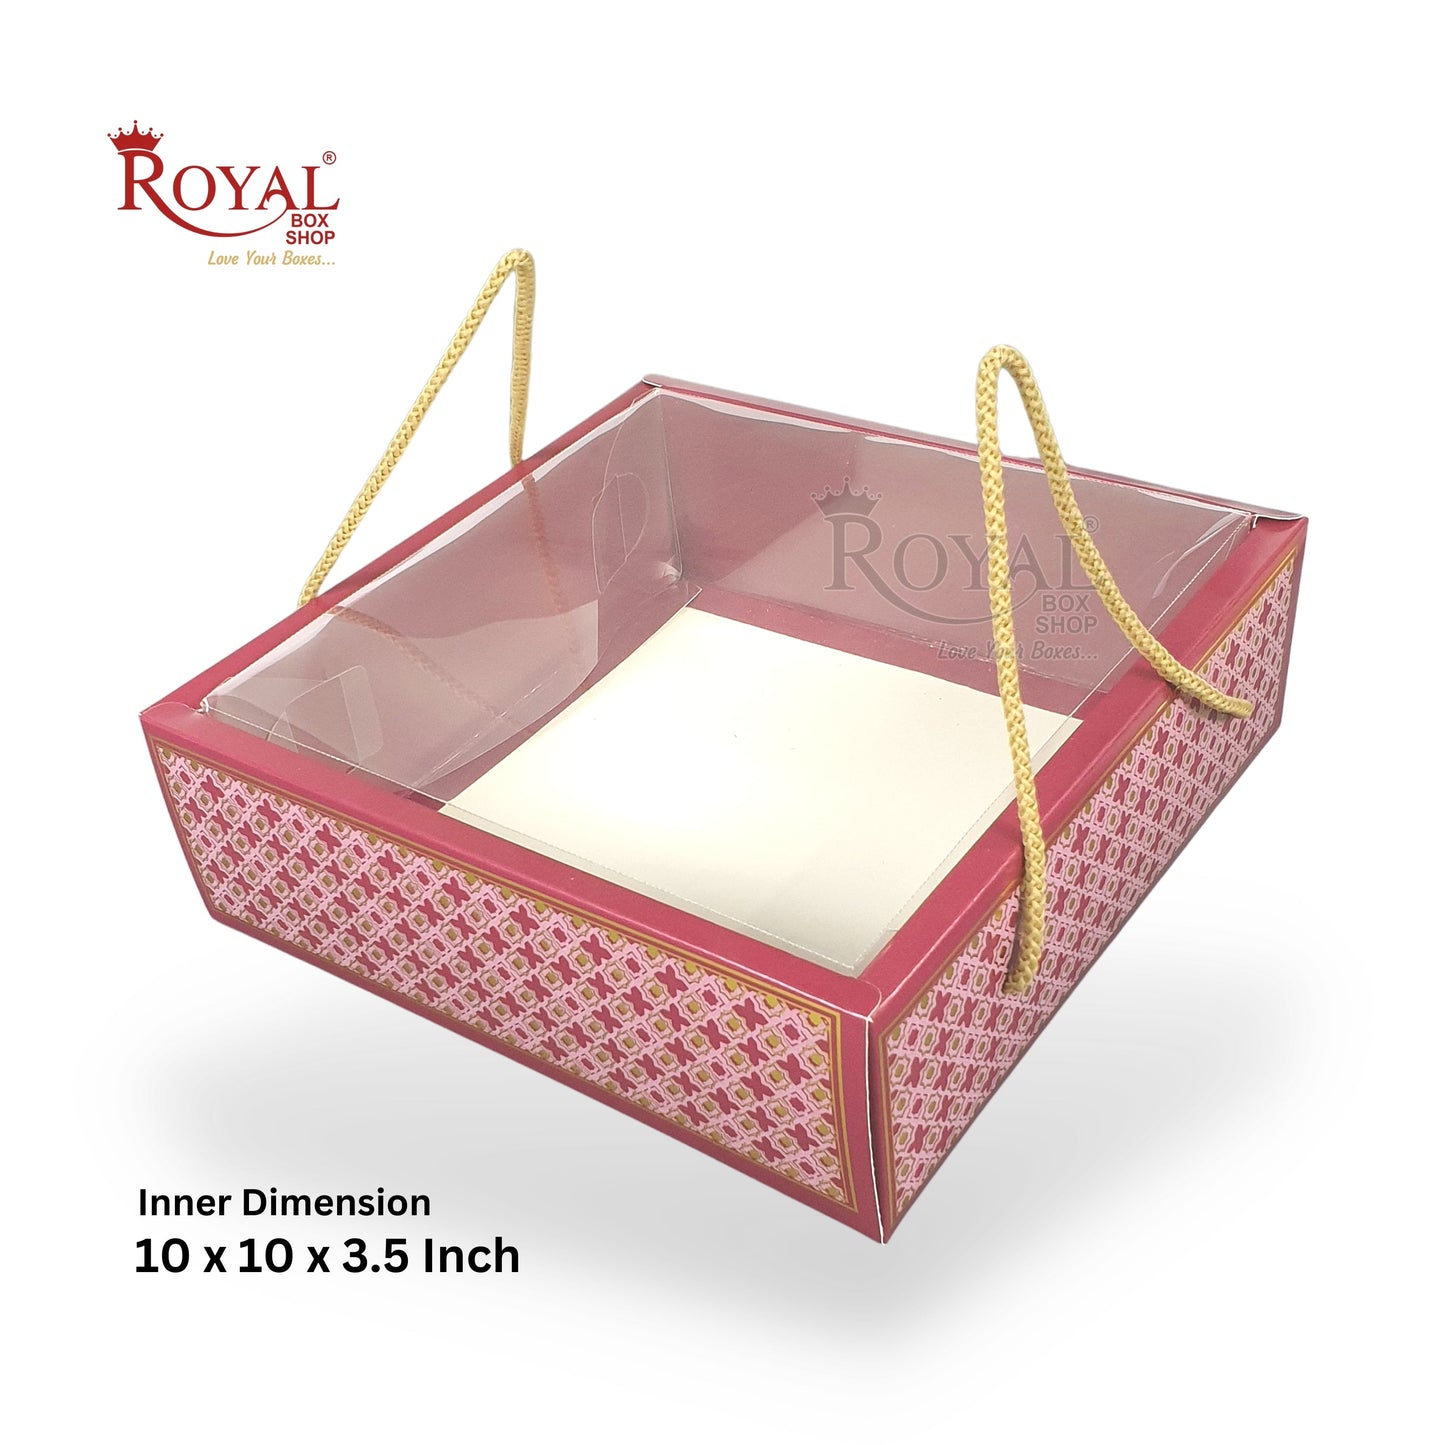 Premium Gift Hamper Bags with Transparent Lid I 10 x 10 x 3.5 inches I Red Star Golden Foil Print I Wedding Party Gifts, Return favor Gifting Royal Box Shop